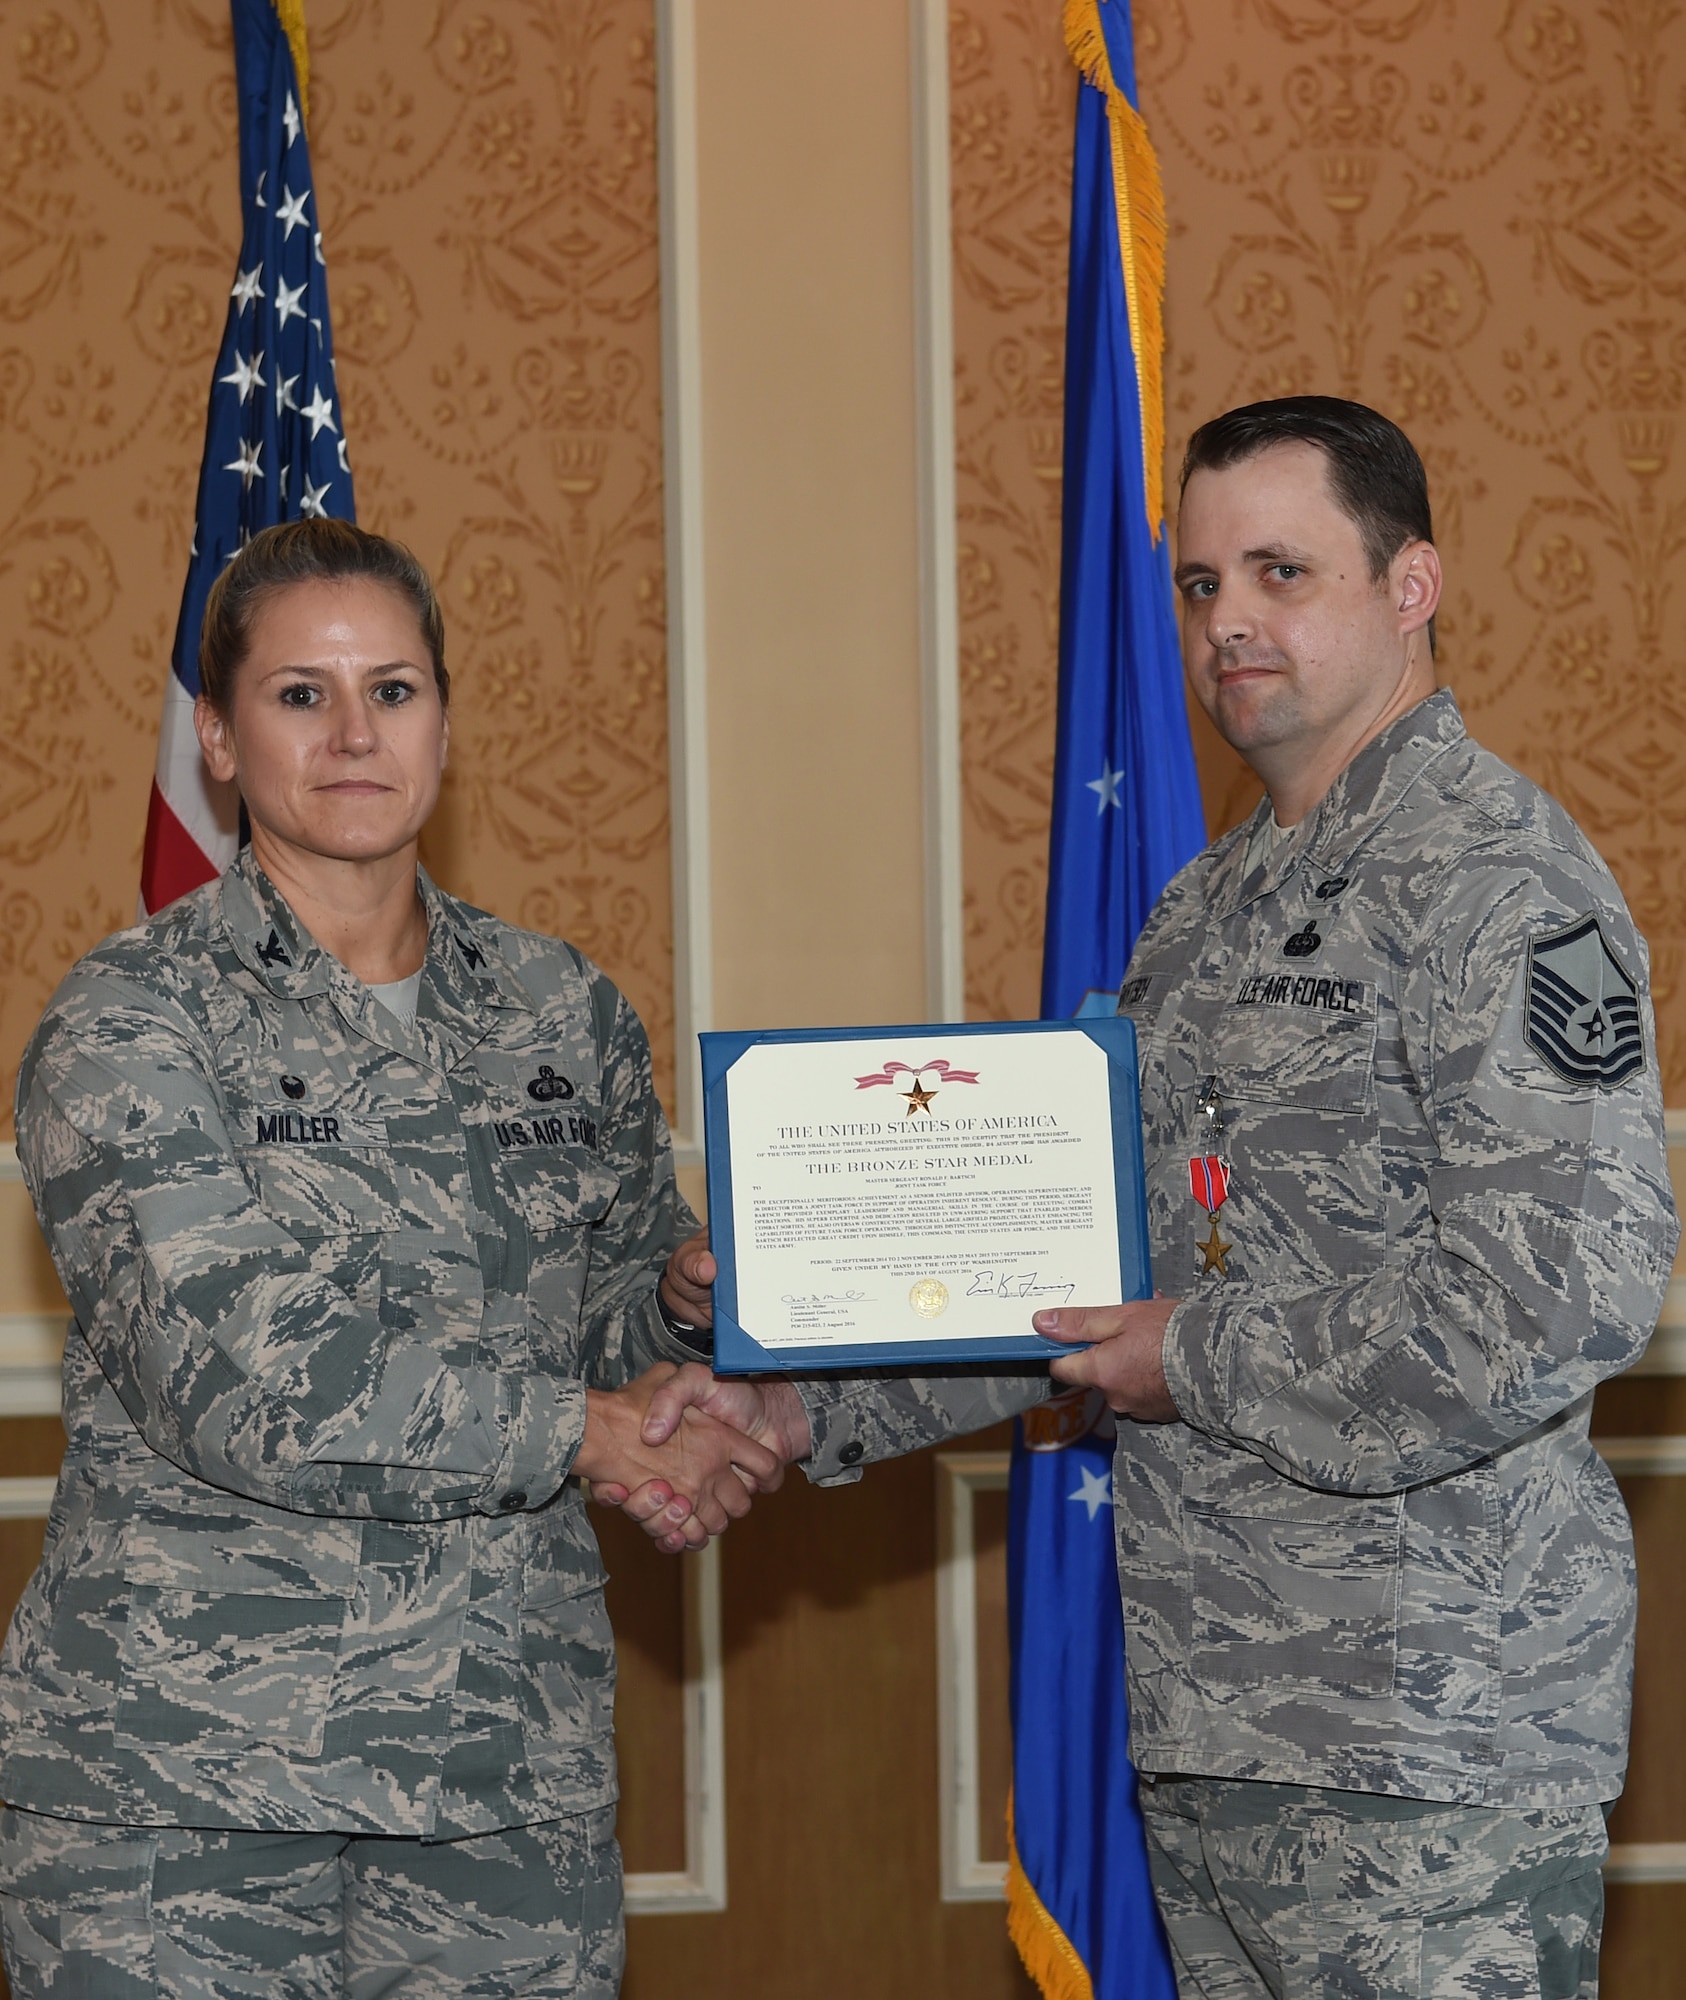 Col. Caroline Miller, 633rd Air Base Wing commander, presents the Bronze Star to Master Sgt. Ronald Bartsch, 633rd Communications Squadron cyber transport superintendent, at Joint Base Langley-Eustis, Va., Oct. 13, 2016. Bartsch was presented with the medal for accomplishments he made as a joint task force operations superintendent, deployed task force communications director a senior enlisted advisor for a Joint Special Operations Air Detachment of 320 service members in support of for Operation Inherent Resolve in Southwest Asia from Sept. 22 to Nov. 2, 2014 and May 25 to Sept. 7, 2015. (U.S. Air Force photo by Staff Sgt. Natasha Stannard)